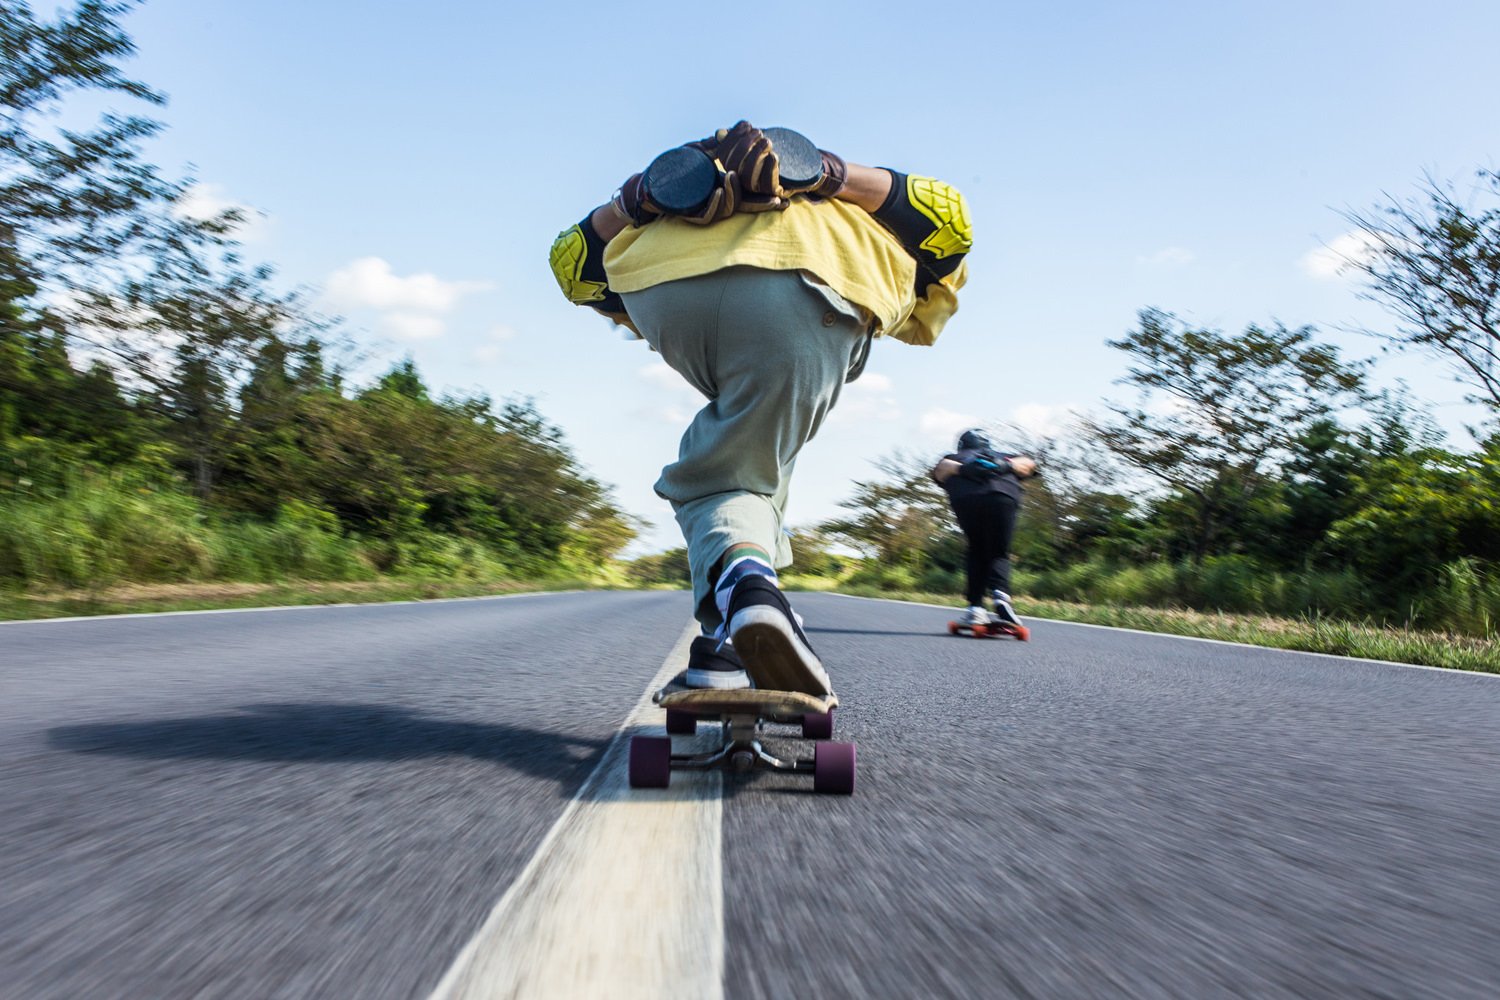 G-Form Protective Gear - Knee Pads - Elbow Pads - Crash Shorts - Downhill Skateboarding